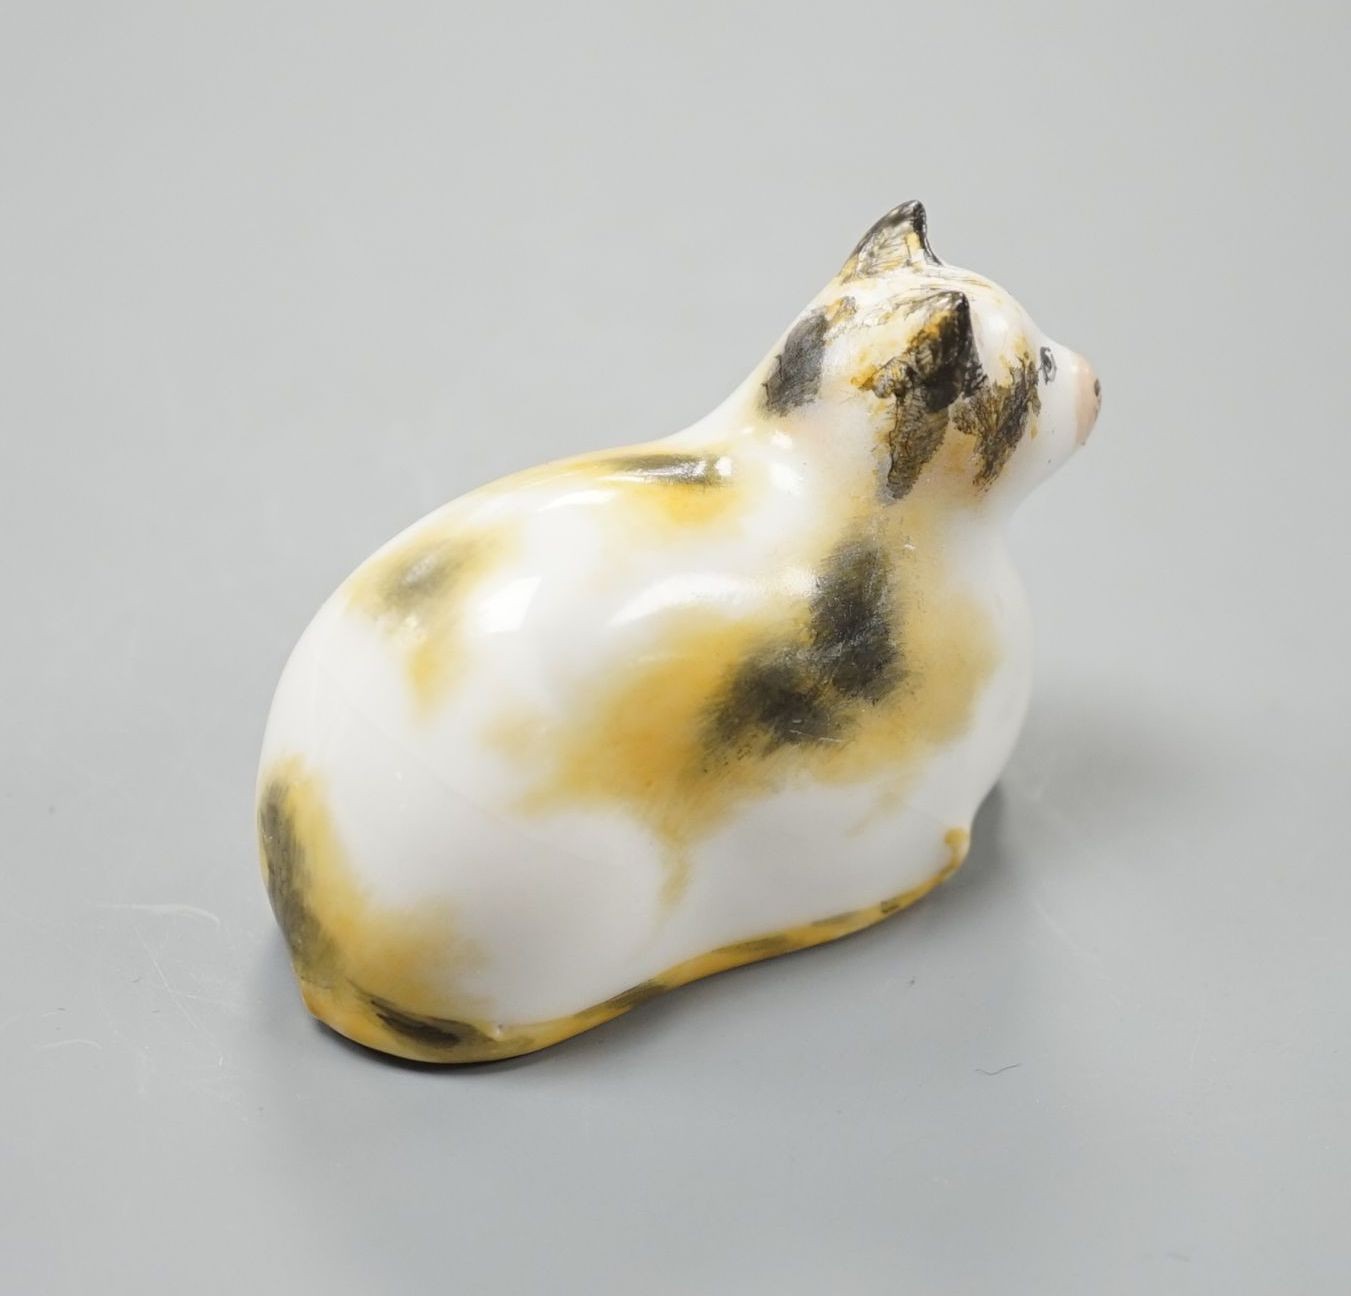 A rare Staffordshire porcelain figure of a recumbent cat, c.1835-50, with impossibly long tail, 6 cm long, Cf. Dennis G.Rice Cats in English porcelain, colour plate 54., Provenance: Dennis G.Rice collection